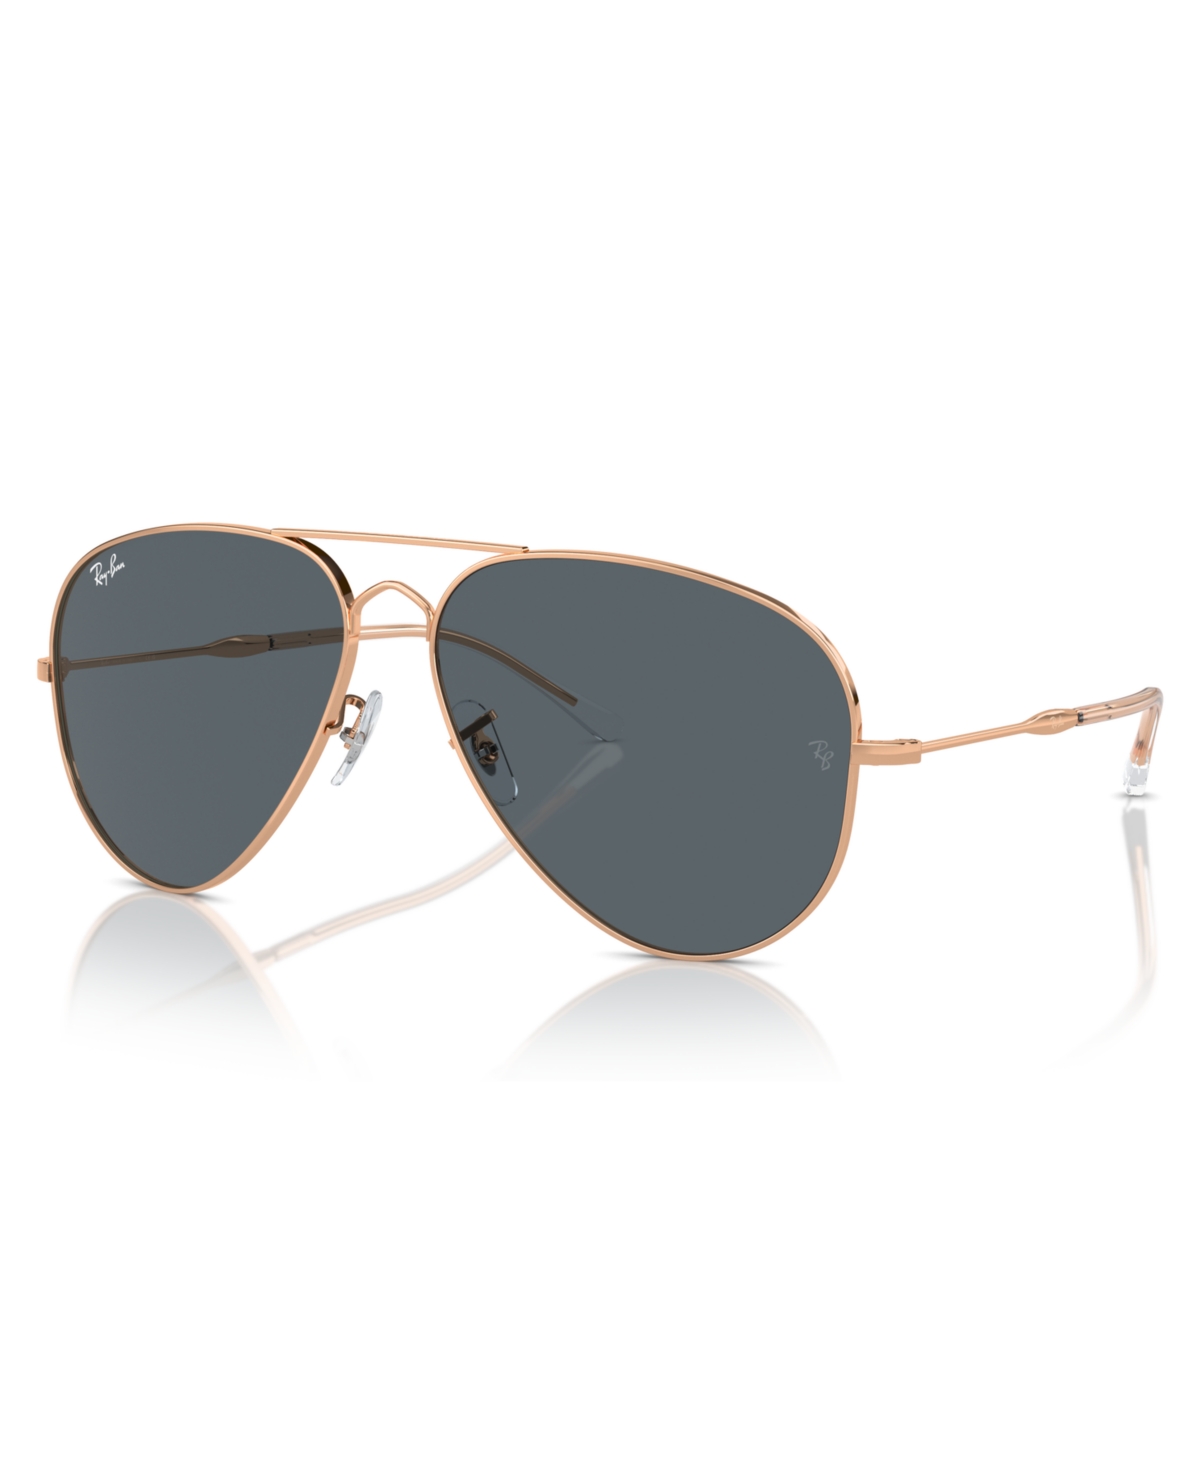 Ray Ban Unisex Sunglasses, Old Aviator Rb3825 In Rose Gold